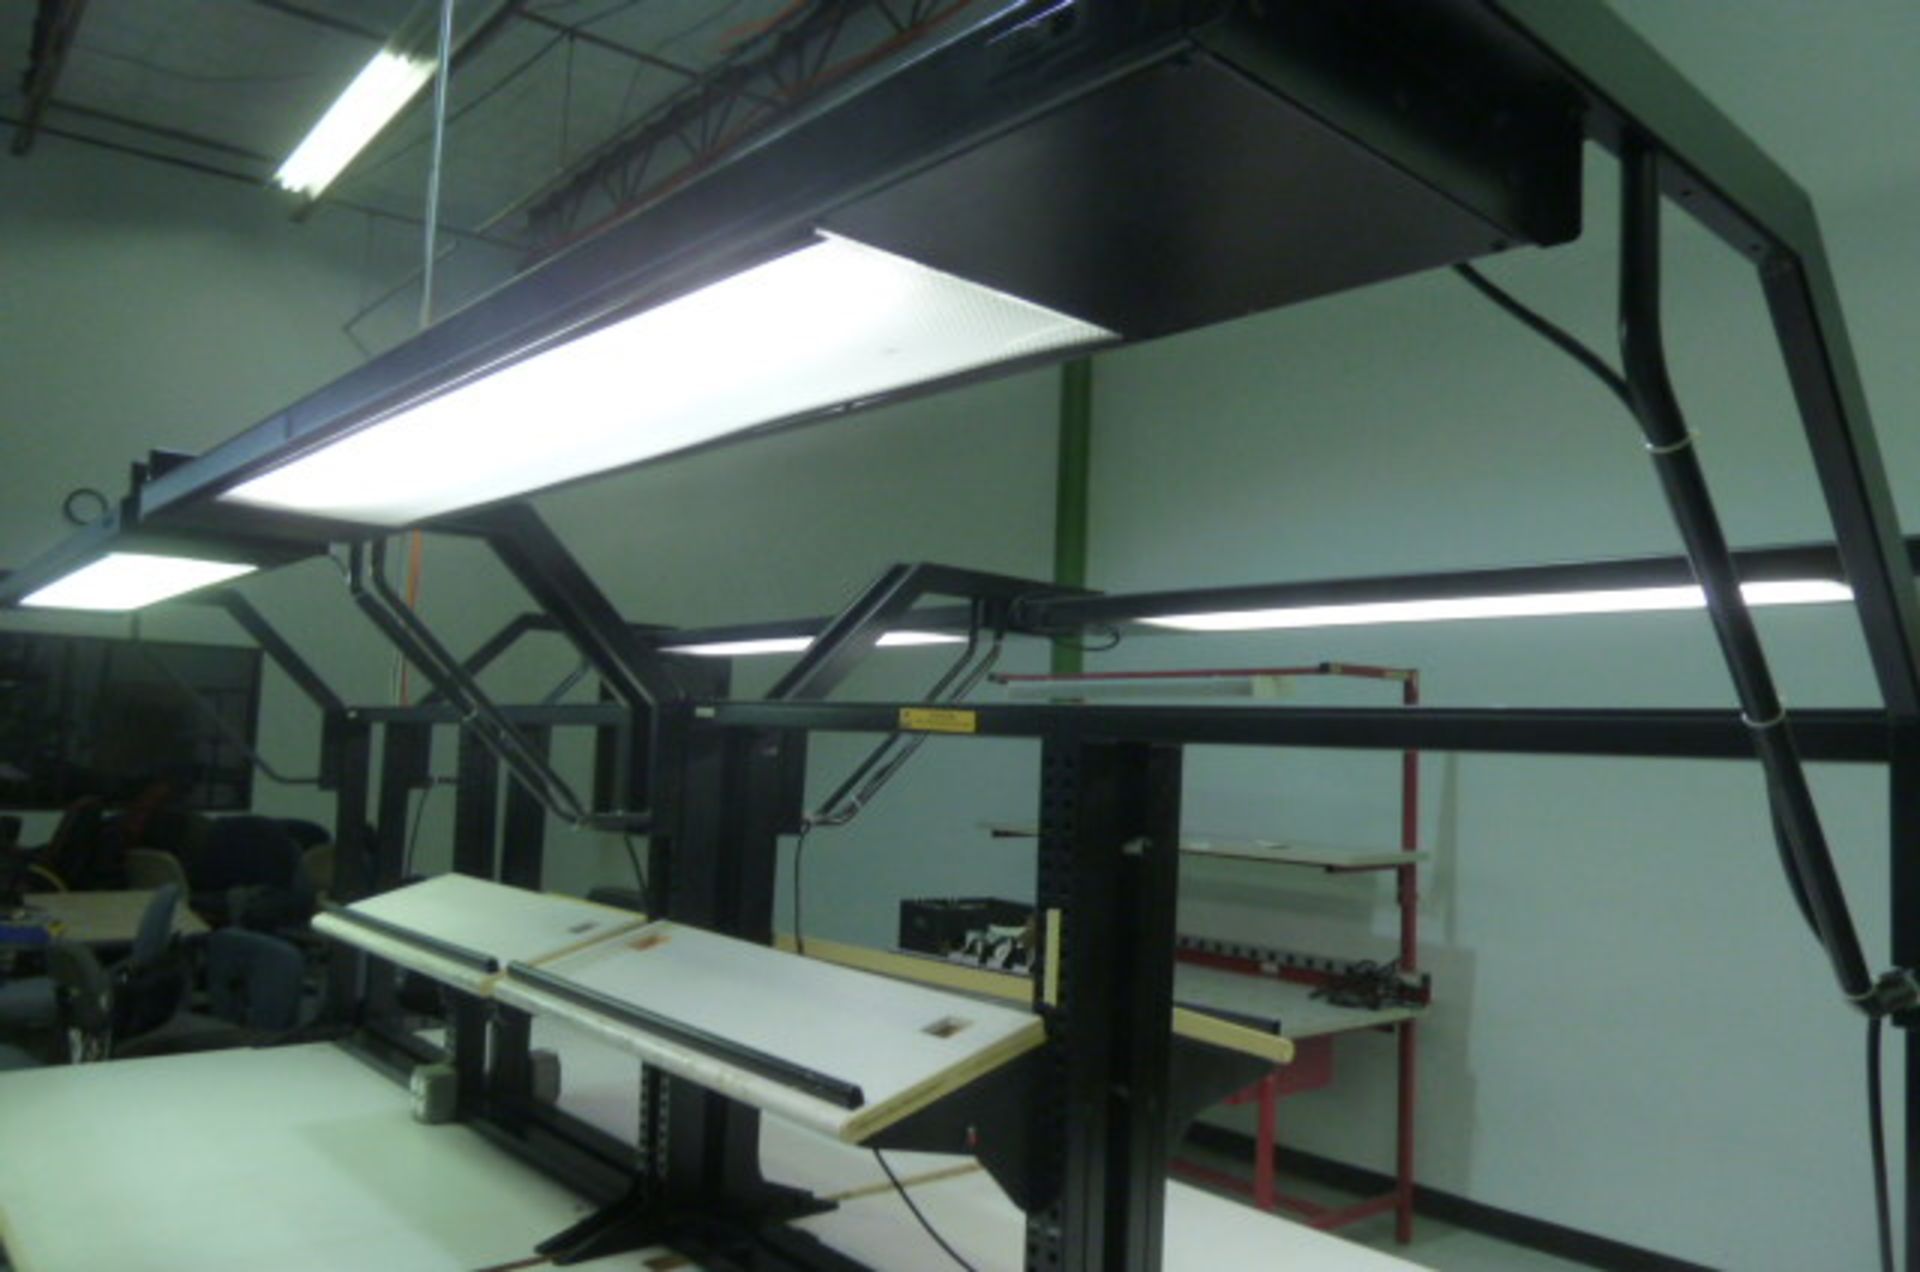 Eaton Wright-Line Lab Insp. Tables - 1 ONLY, 72" x 30" w/ 4 electrical outlets, overhead lighting - Image 4 of 4